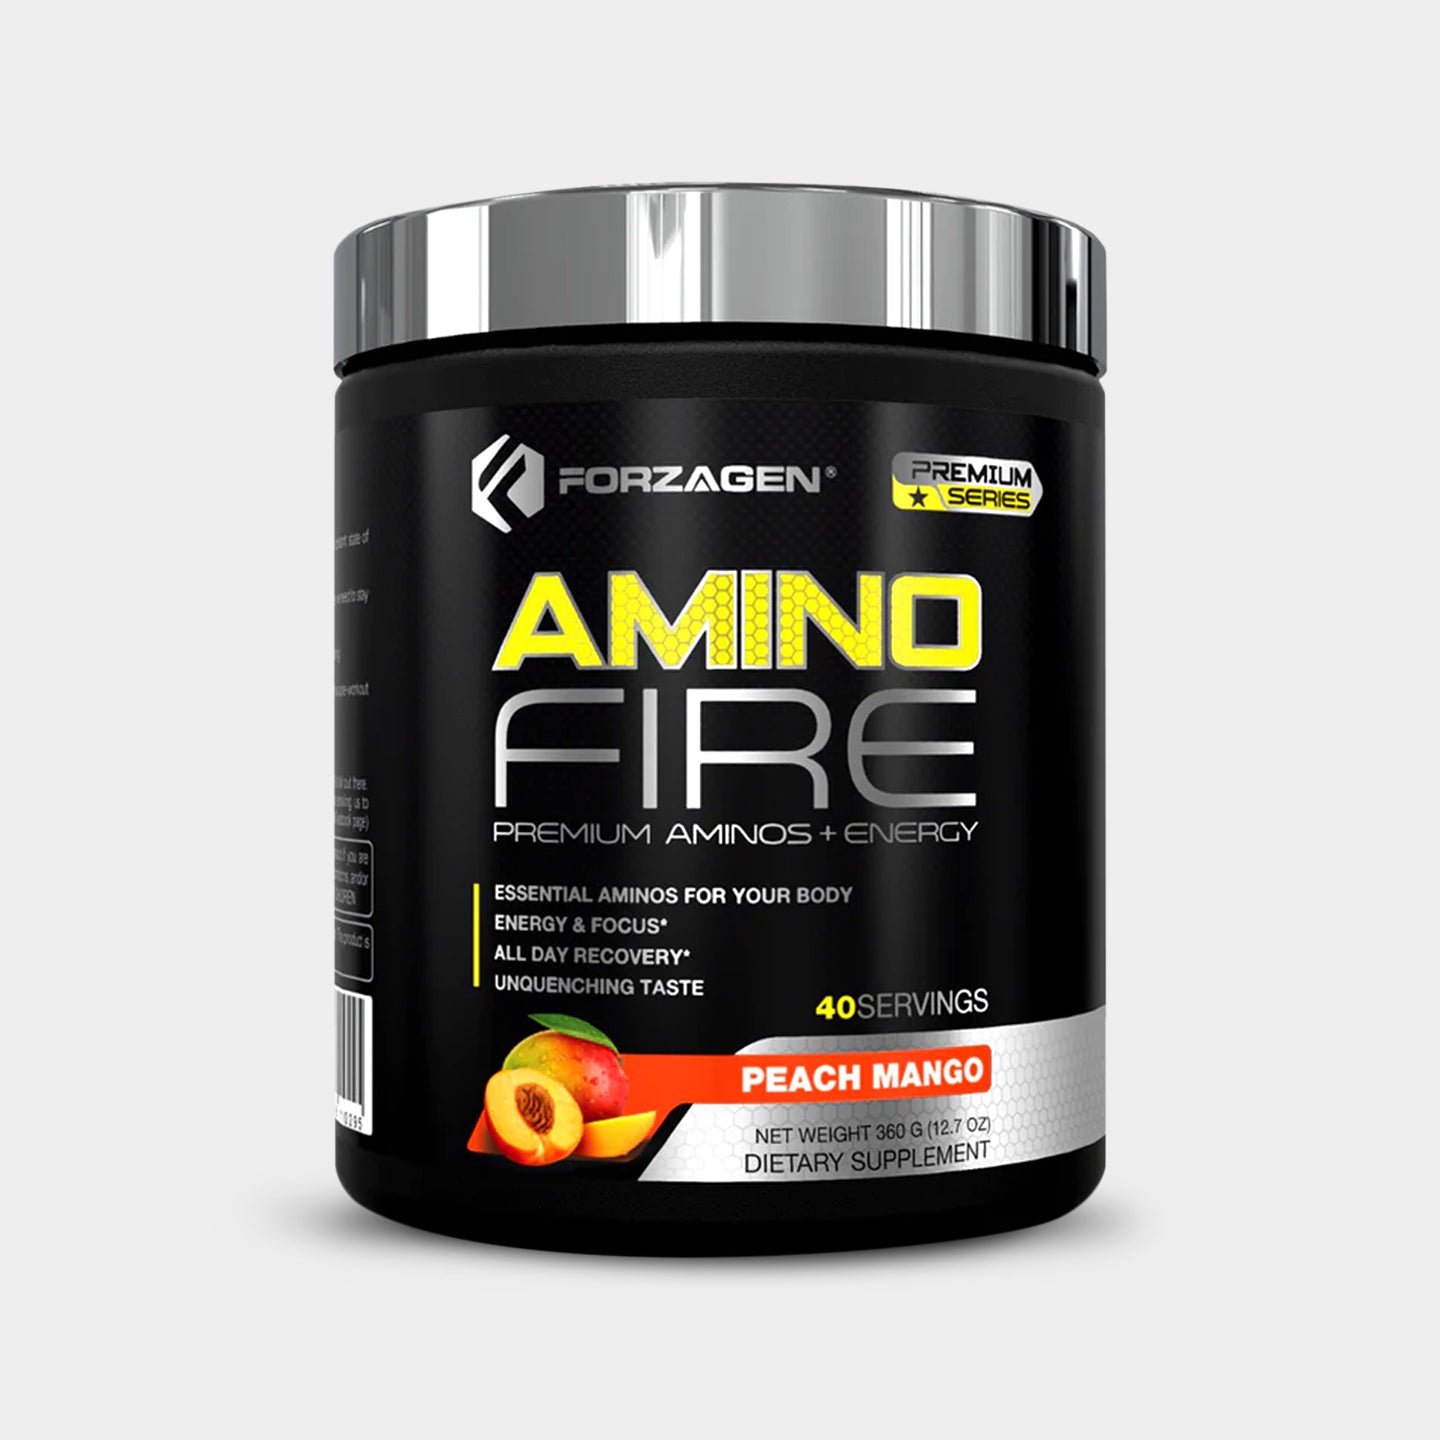 Forzagen Amino Fire Essential BCAAs + Pre Workout Energy A1